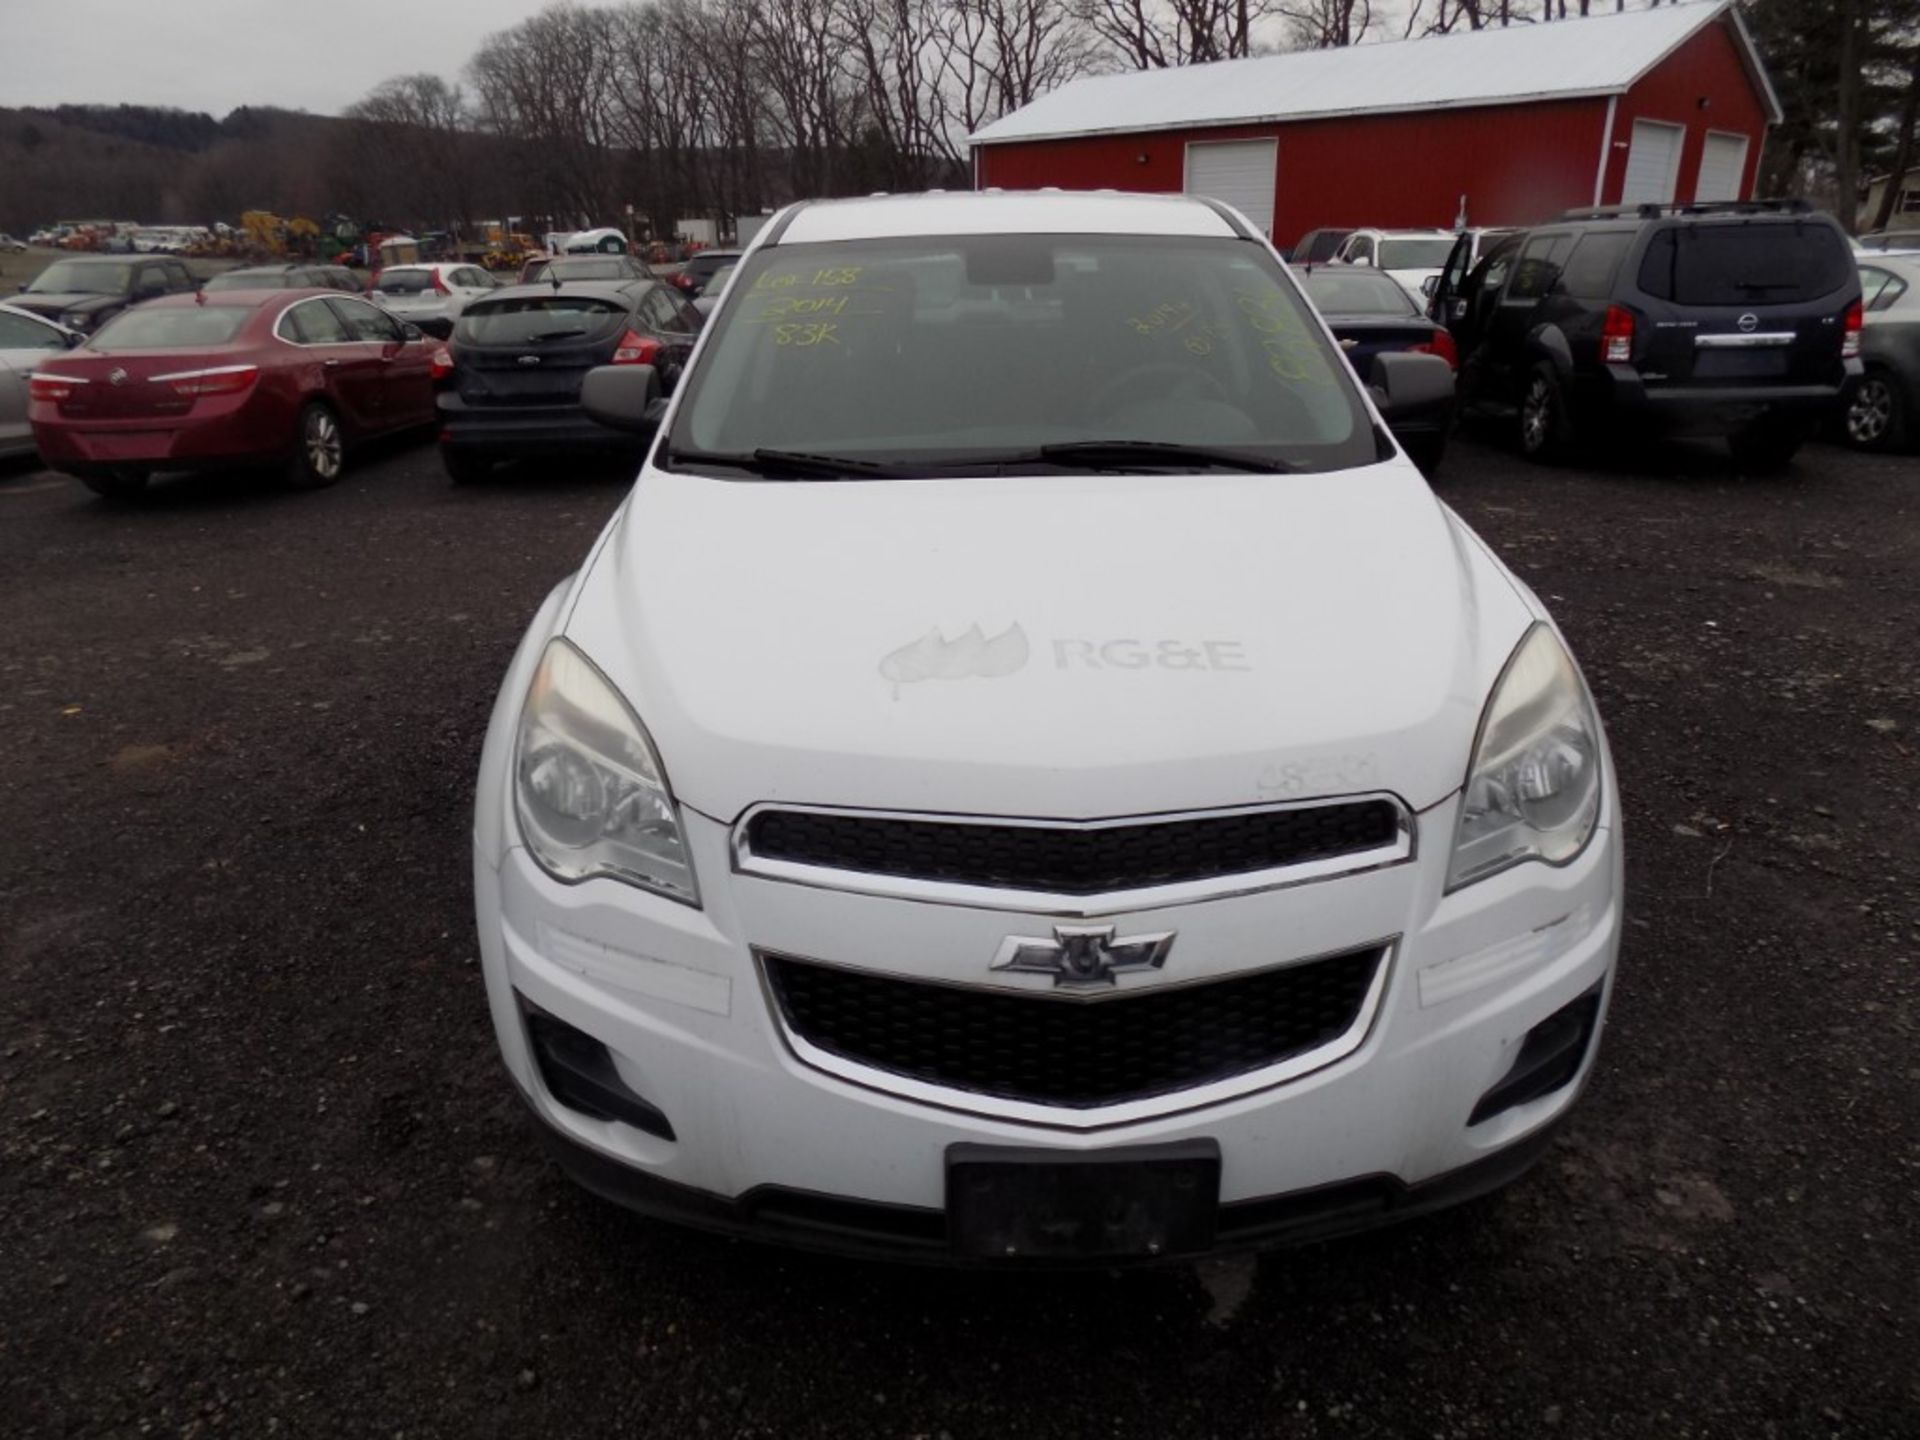 2014 Chevrolet Equinox LS, AWD, White, 83,836 Mi, Vin# 2GNFLEEK9E6247189 - OPEN TO ALL BUYERS, DECAL - Image 2 of 9